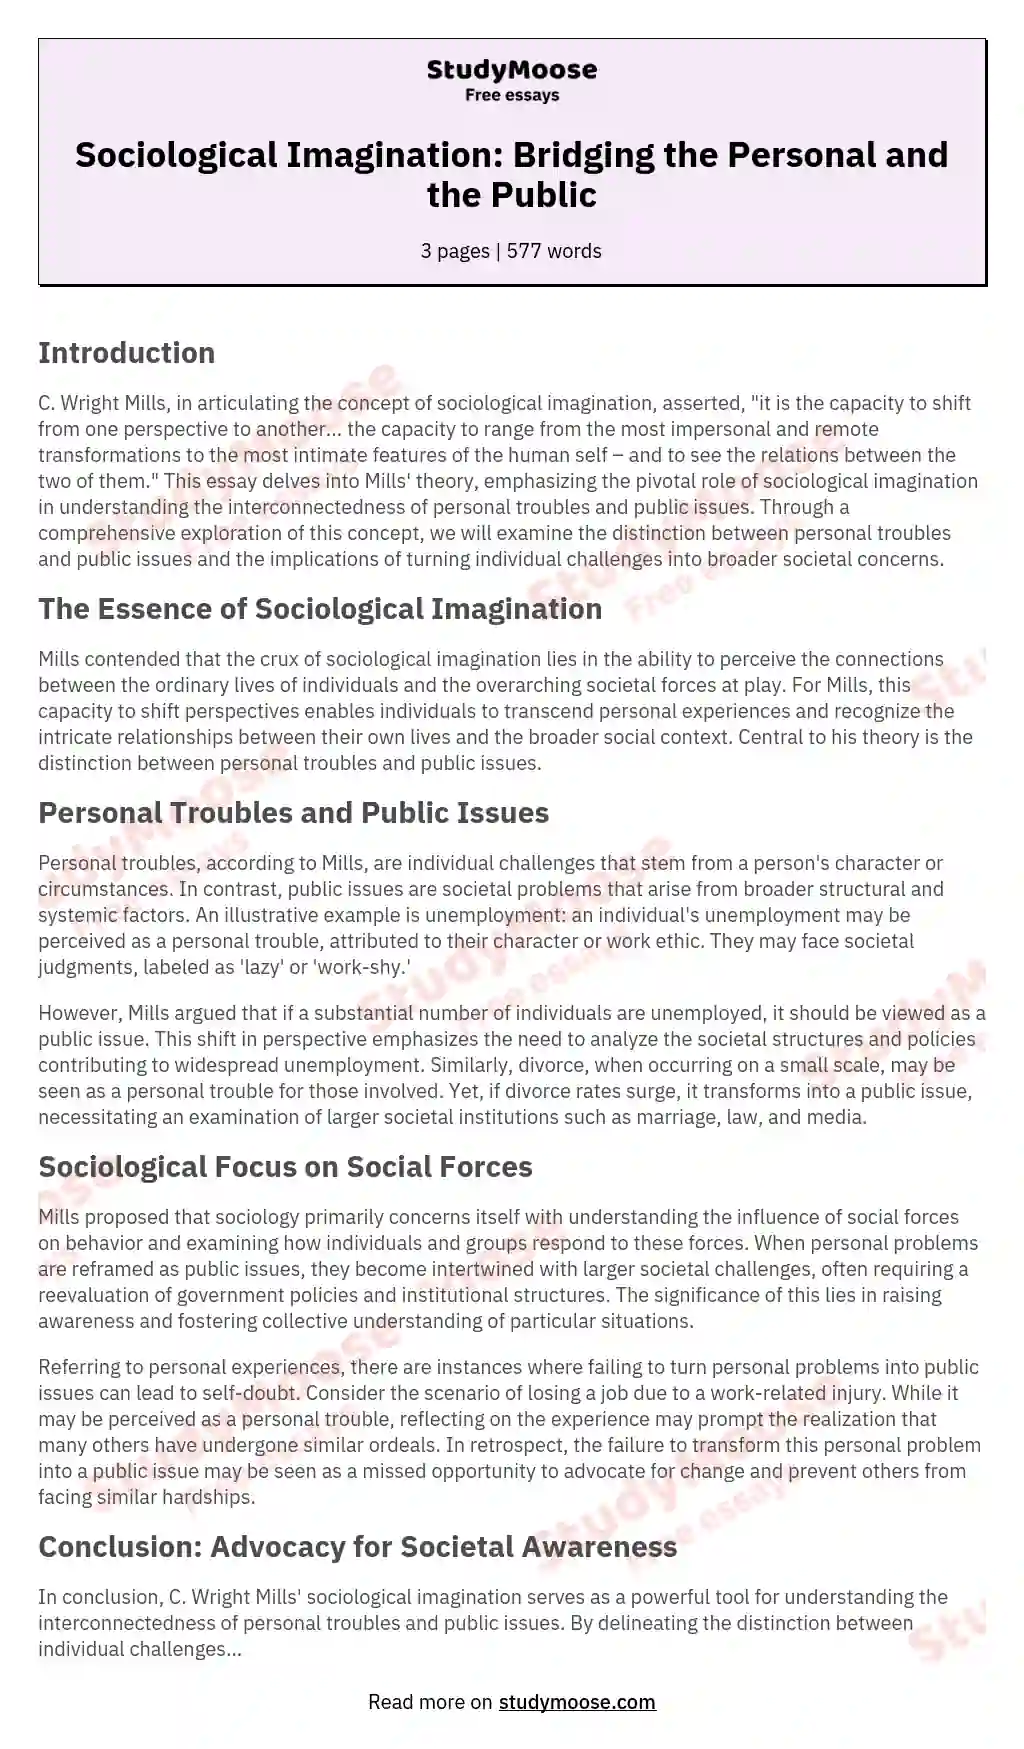 Sociological Imagination: Bridging the Personal and the Public essay